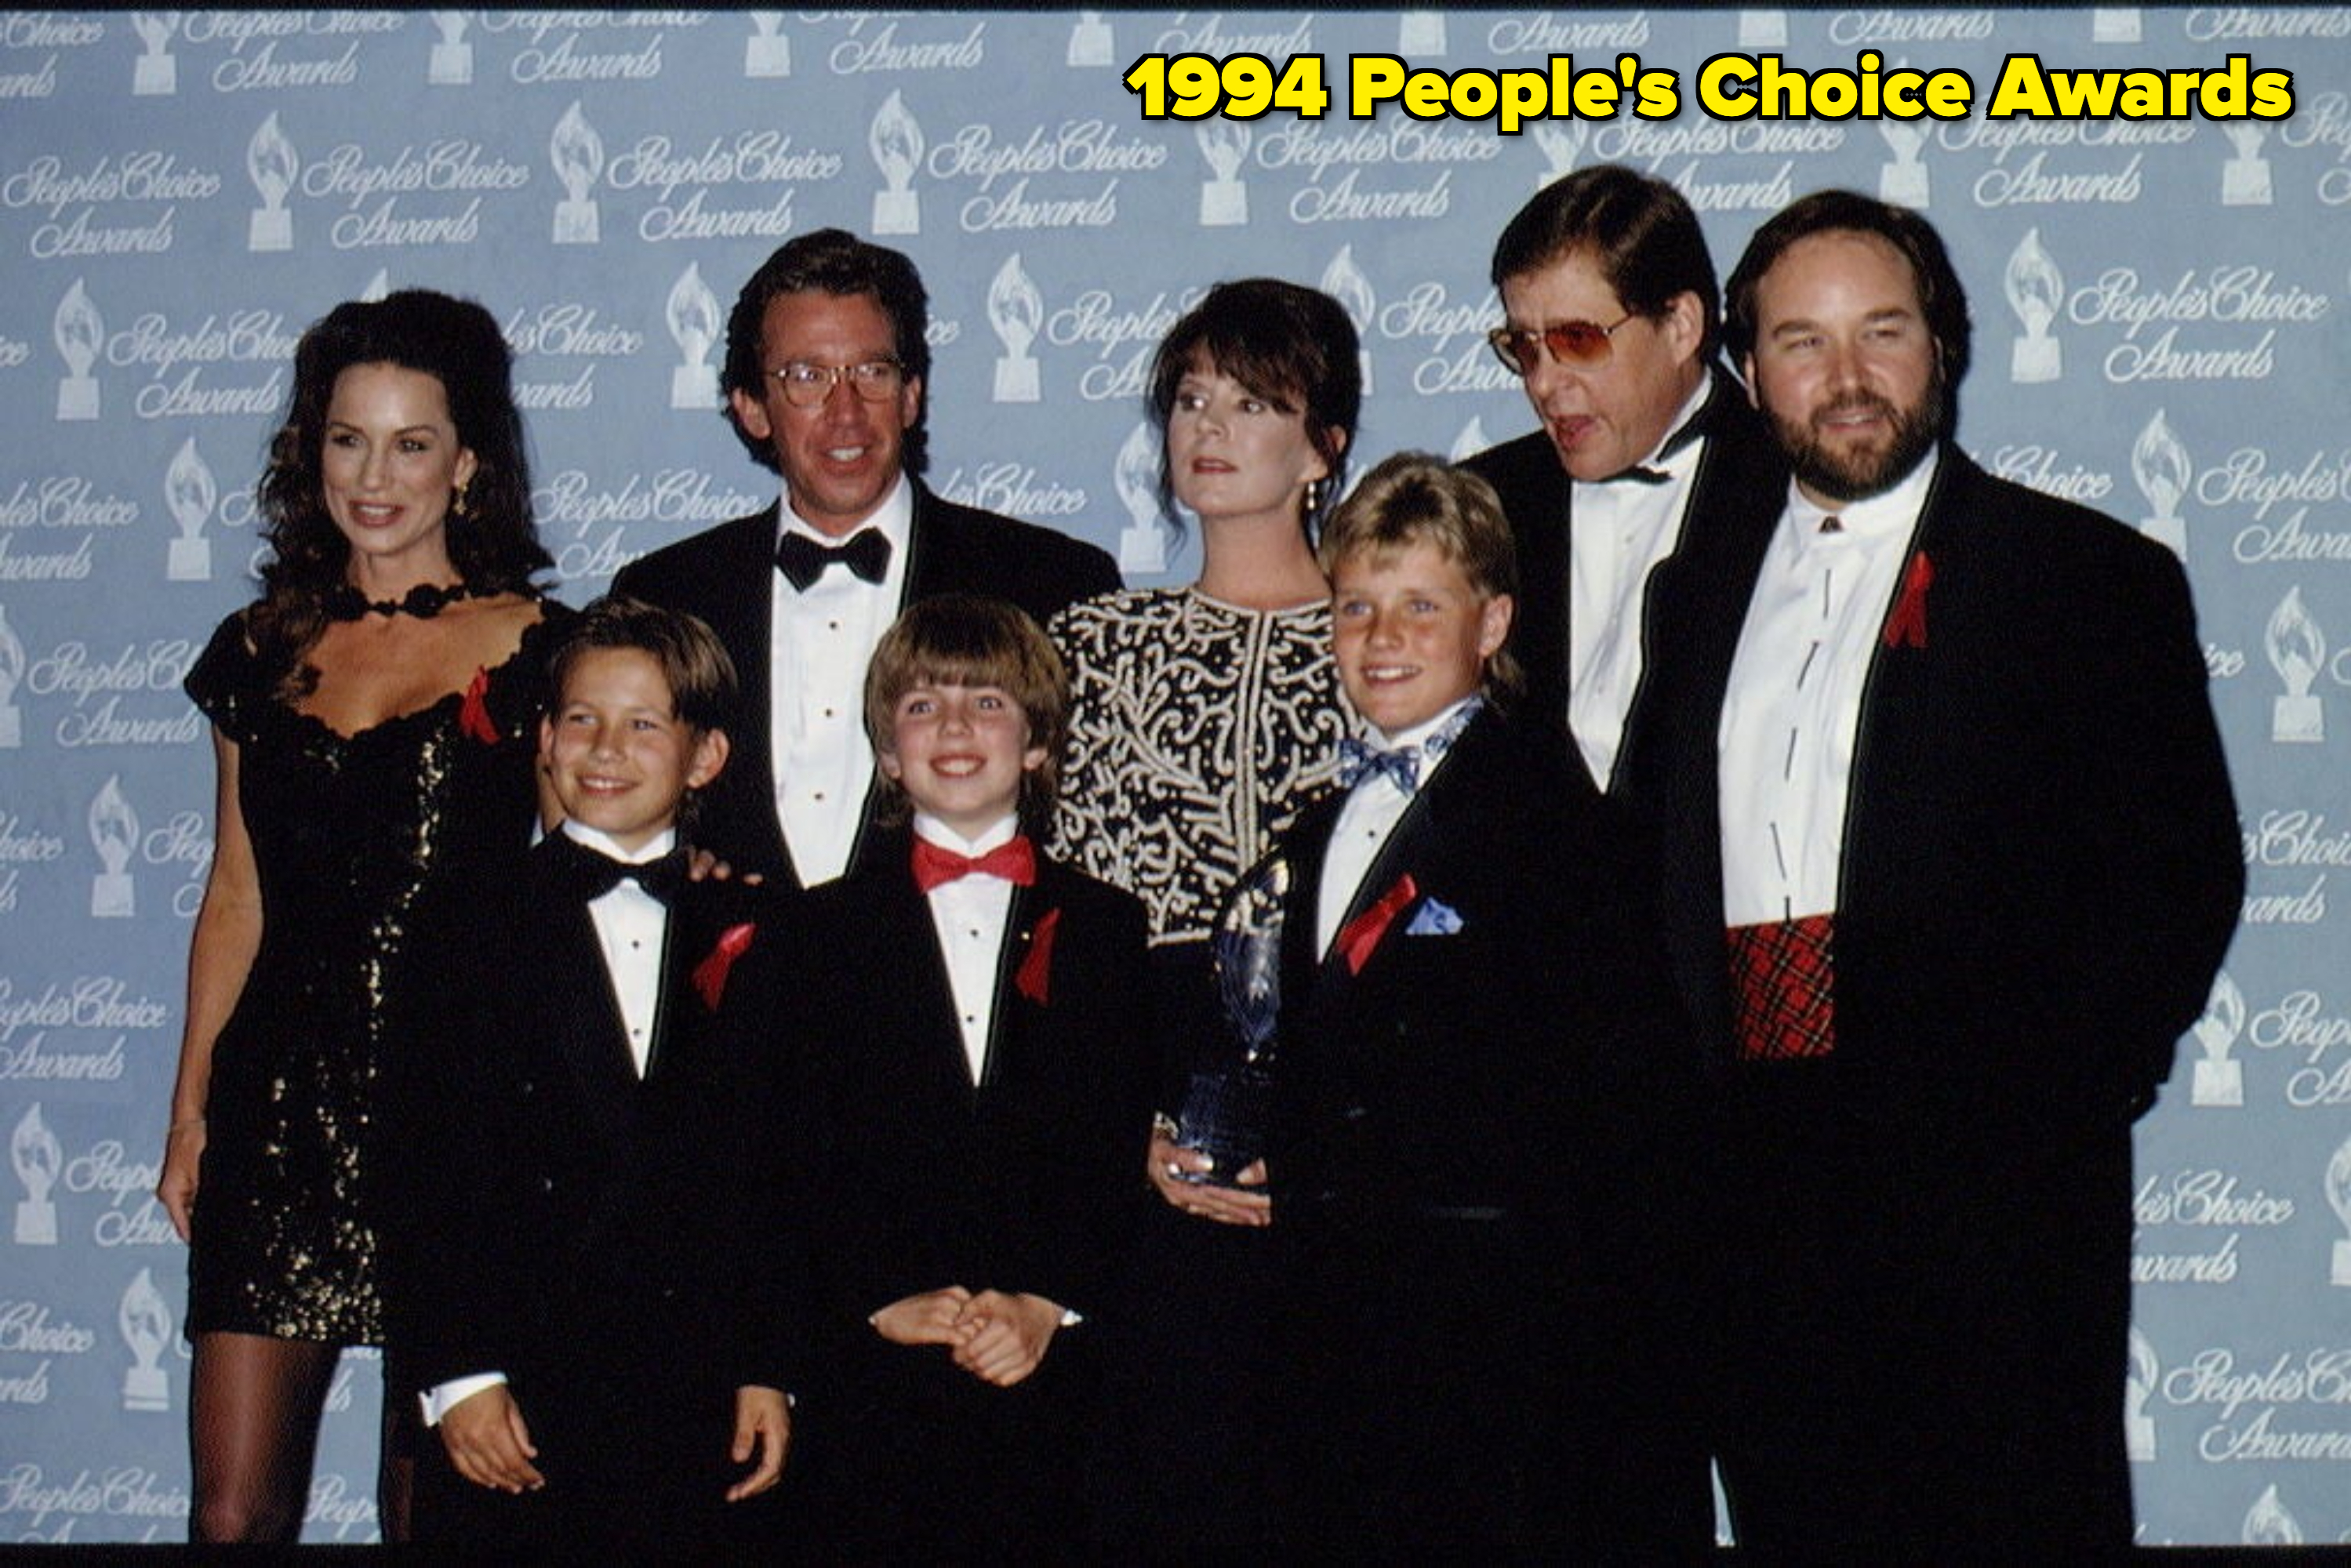 Group of seven at an award show; four adults in formal wear and three children in suits, with a trophy